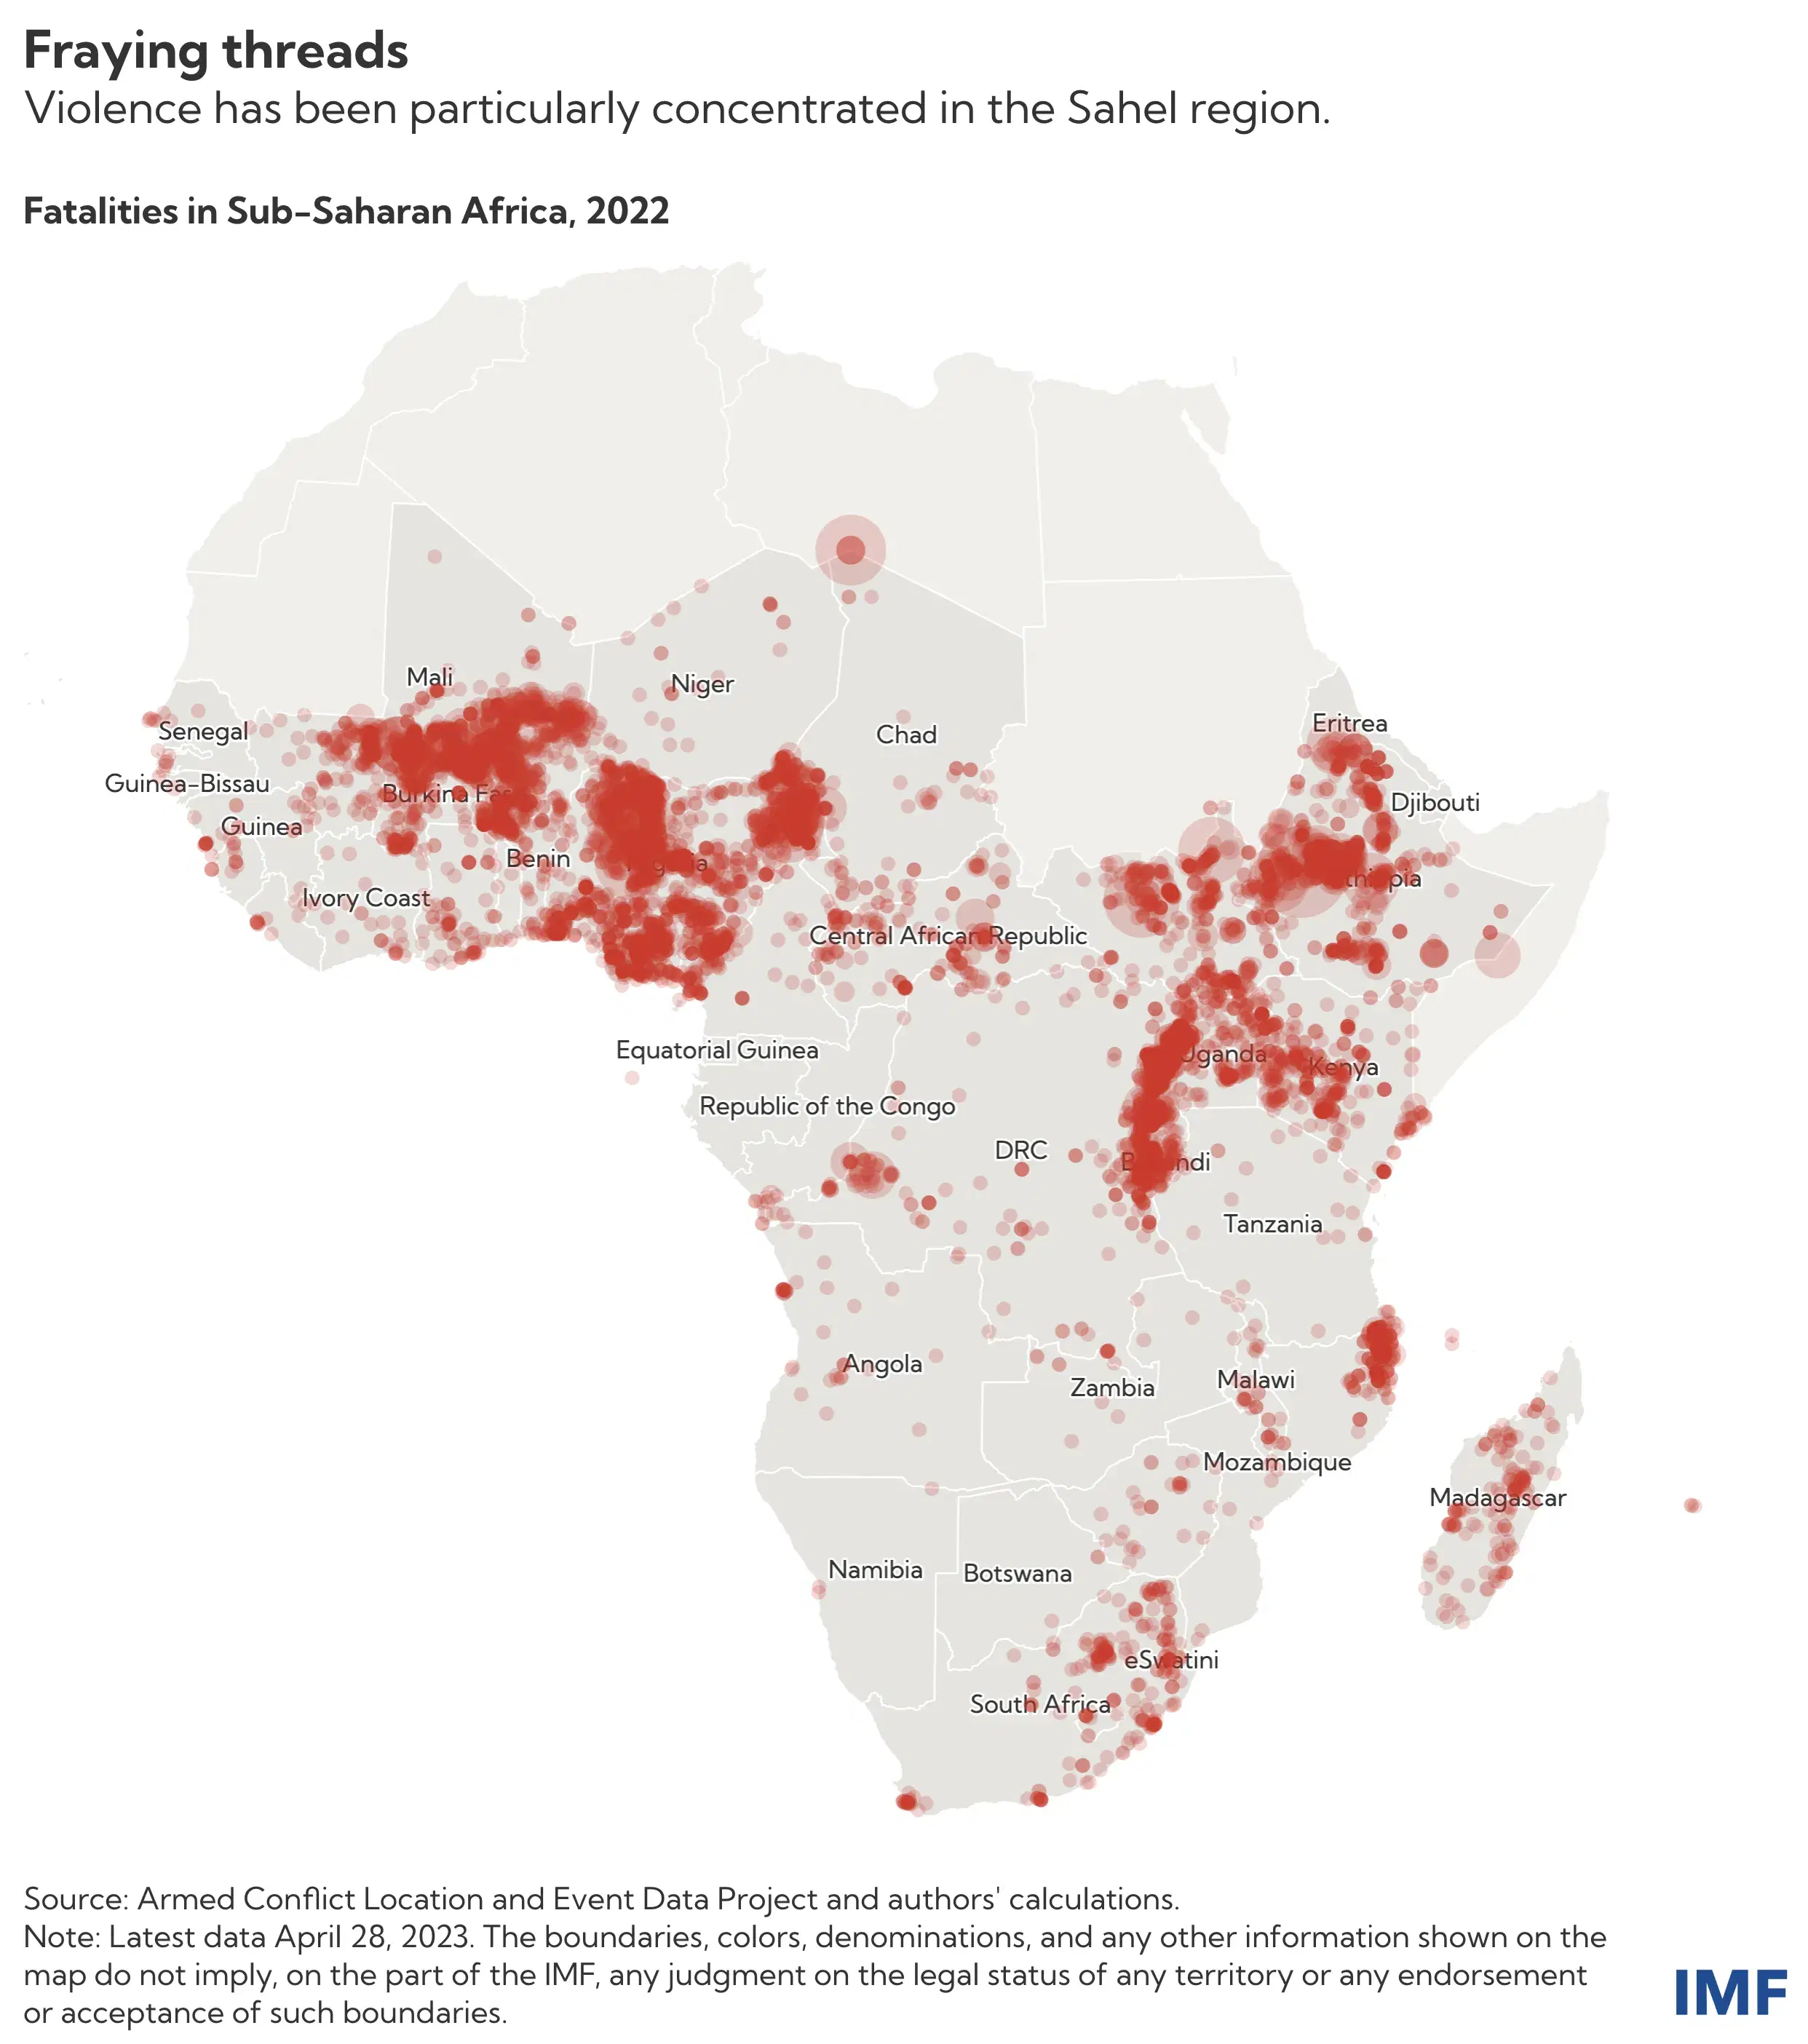 Mapping Violence in the Sahel region